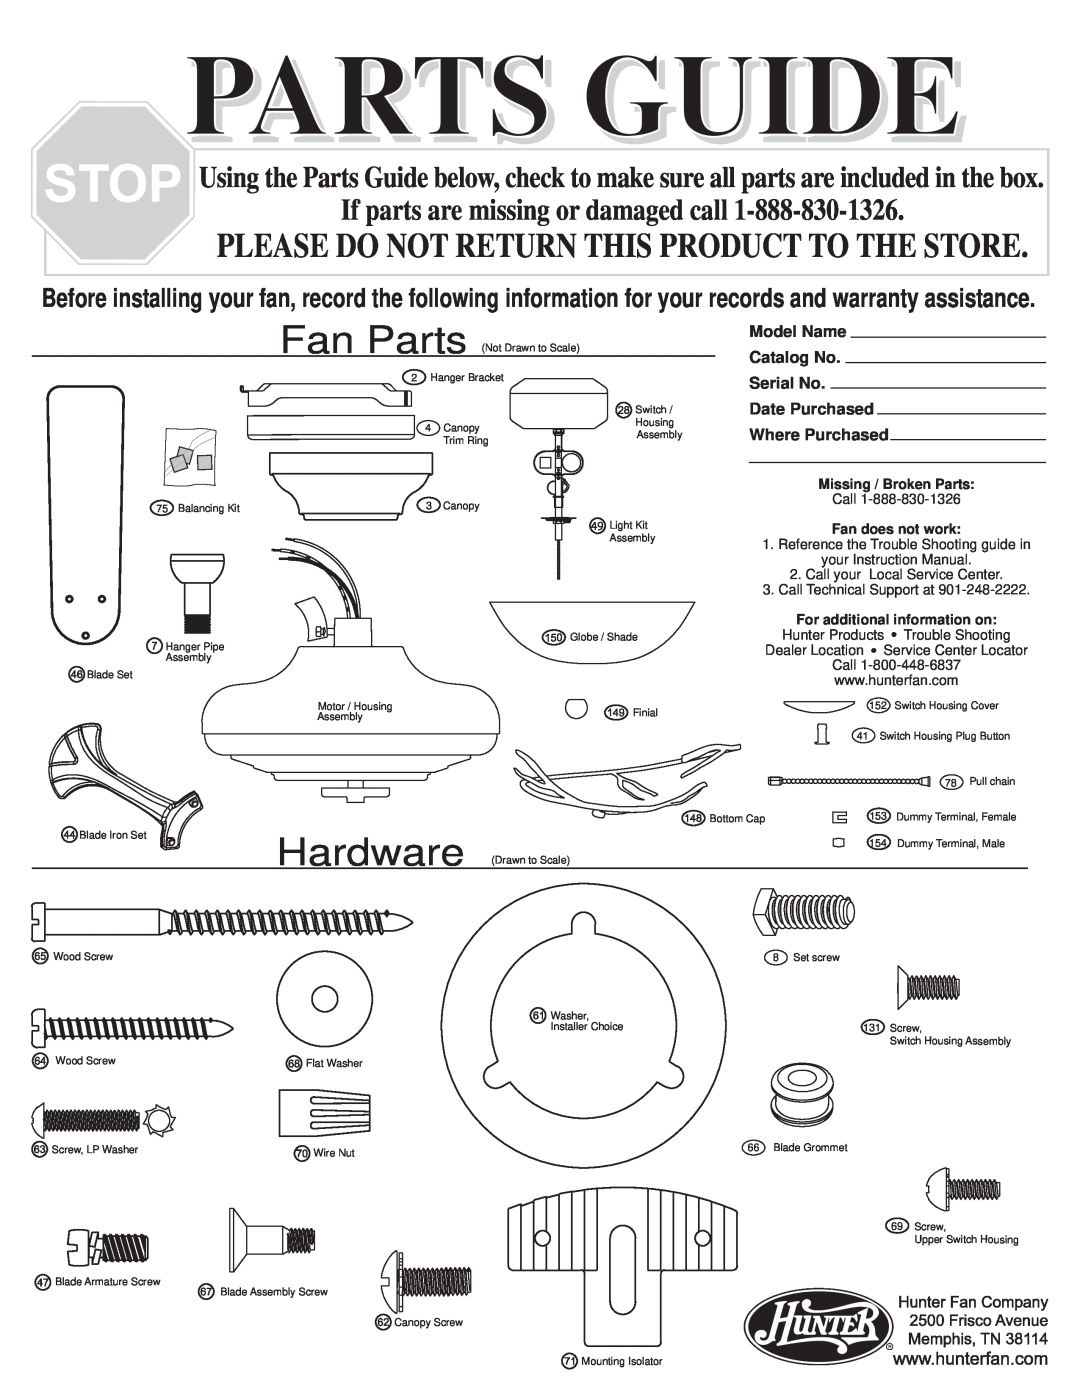 Hunter Fan 22540 warranty Model Name Catalog No Serial No Date Purchased, Where Purchased, Parts Guide, Fan Parts, Call 